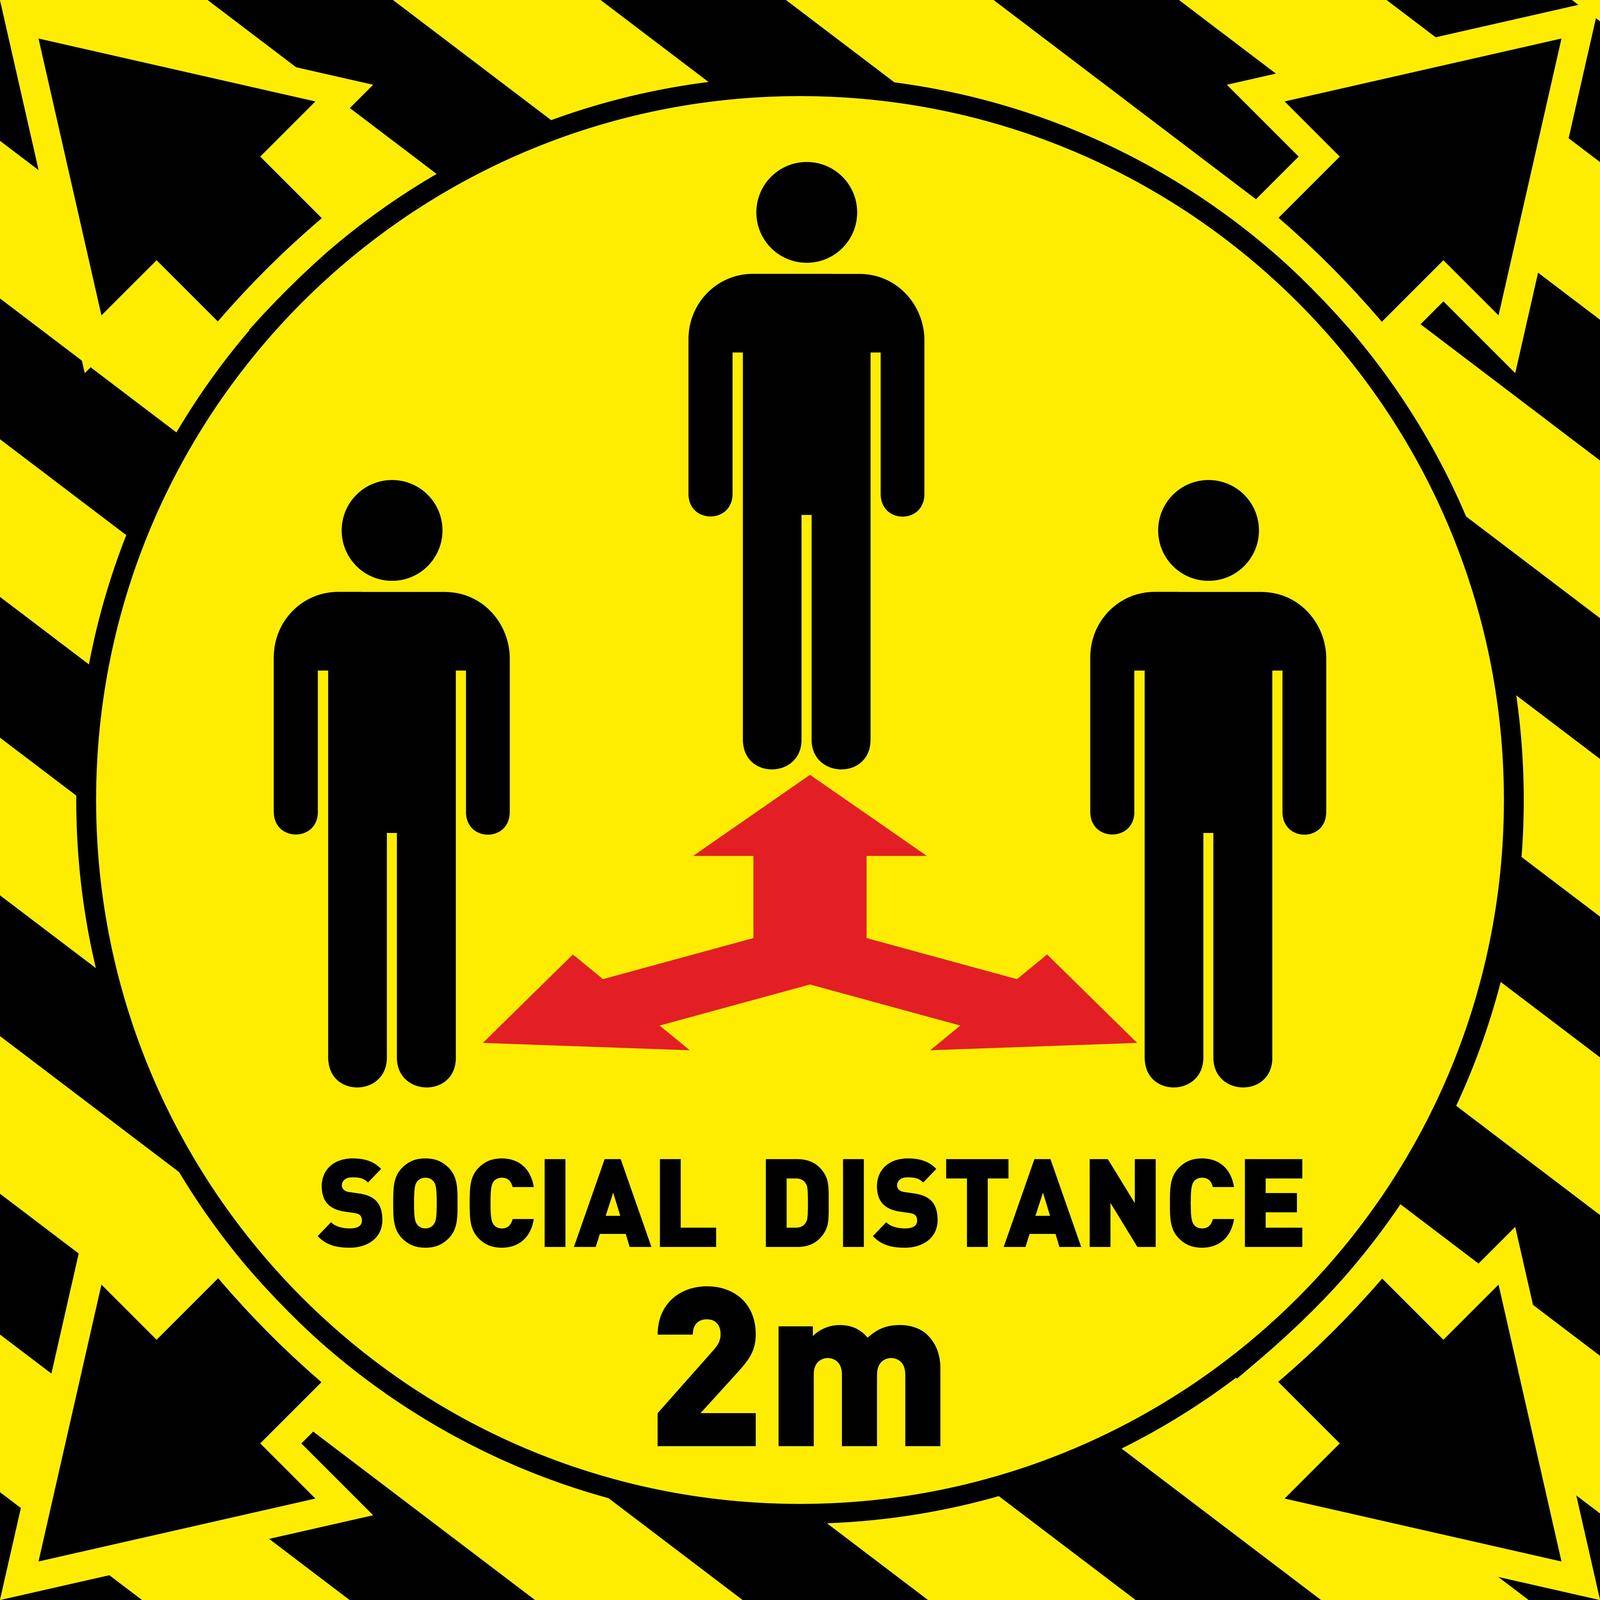 Social distancing. Keep the 2 meter distance. Coronovirus epidemic protective. Vector illustration by mtx